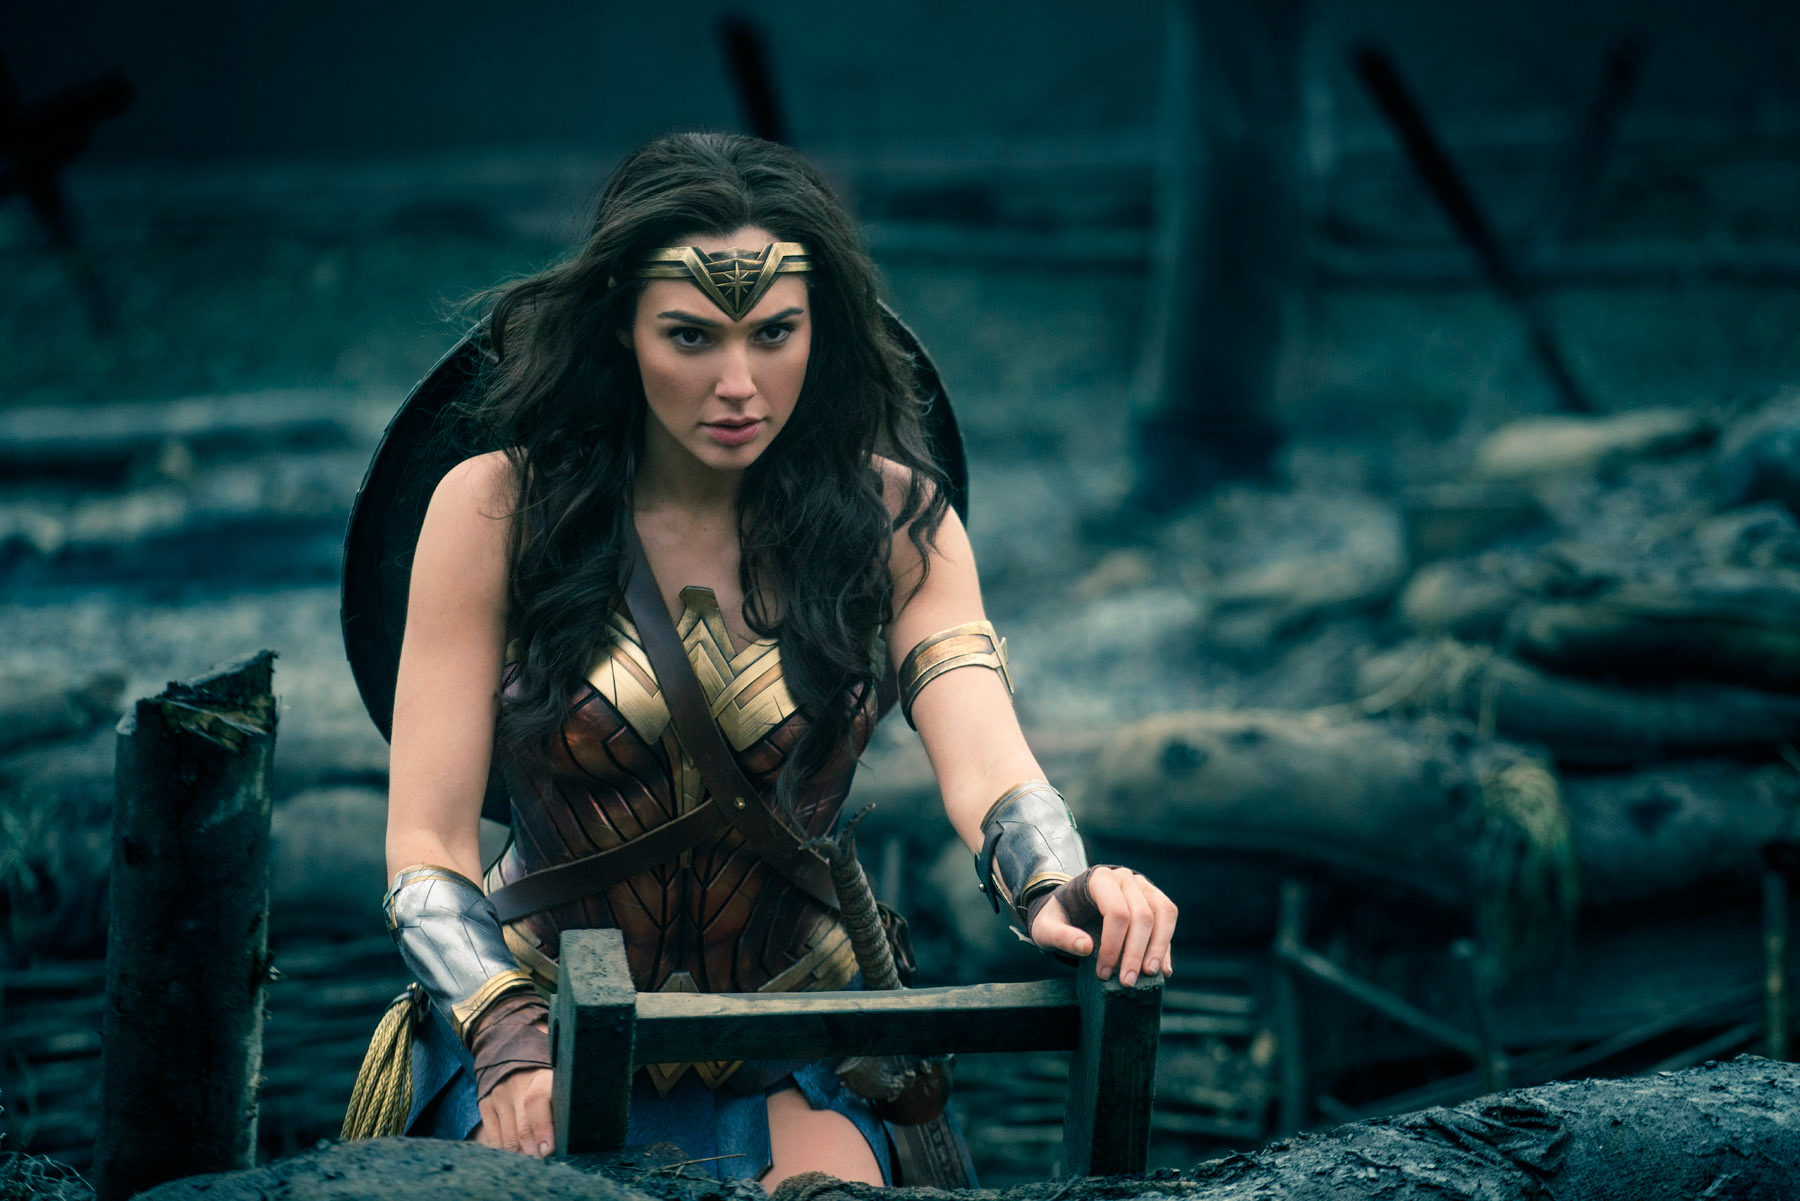 New Wonder Woman Actress: Why Gal Gadot Is the Perfect Choice